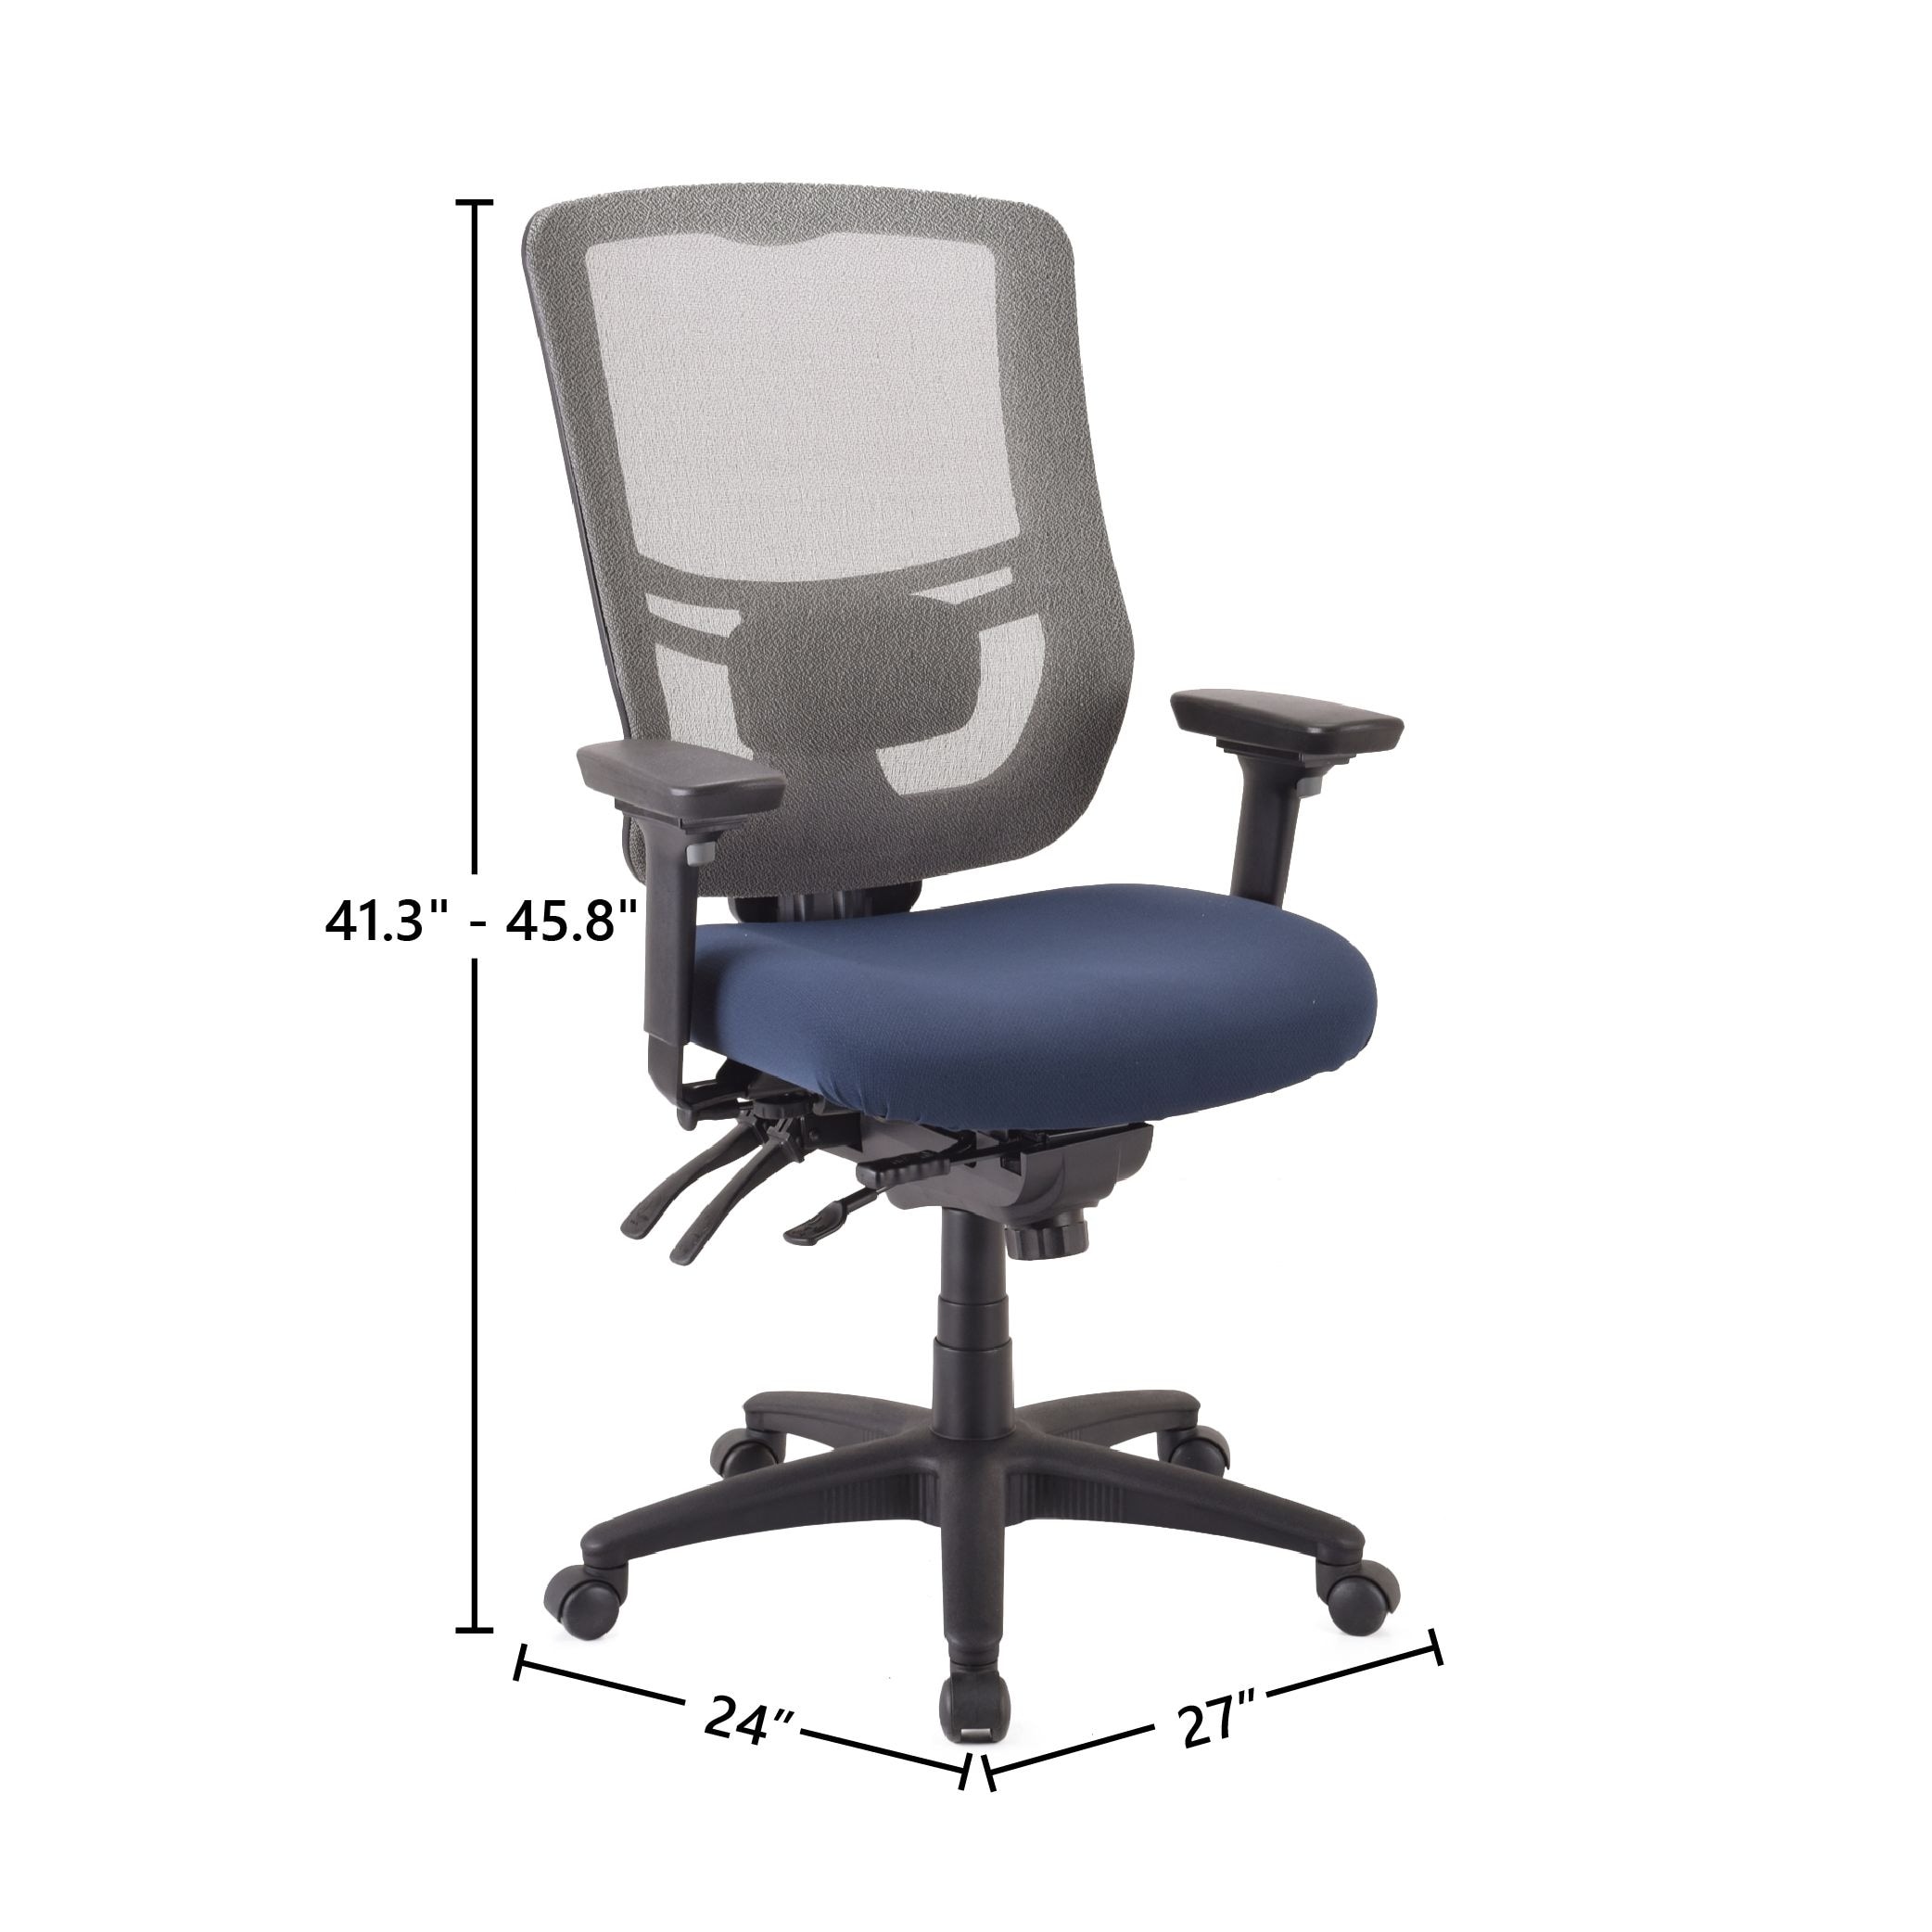 https://ak1.ostkcdn.com/images/products/is/images/direct/c21473bb5a3385d05d205eca8425228732f10fa7/Tempur-Pedic%C2%AE-Fully-Adjustable-Task-Chair-with-Cool-Mesh-Back.jpg